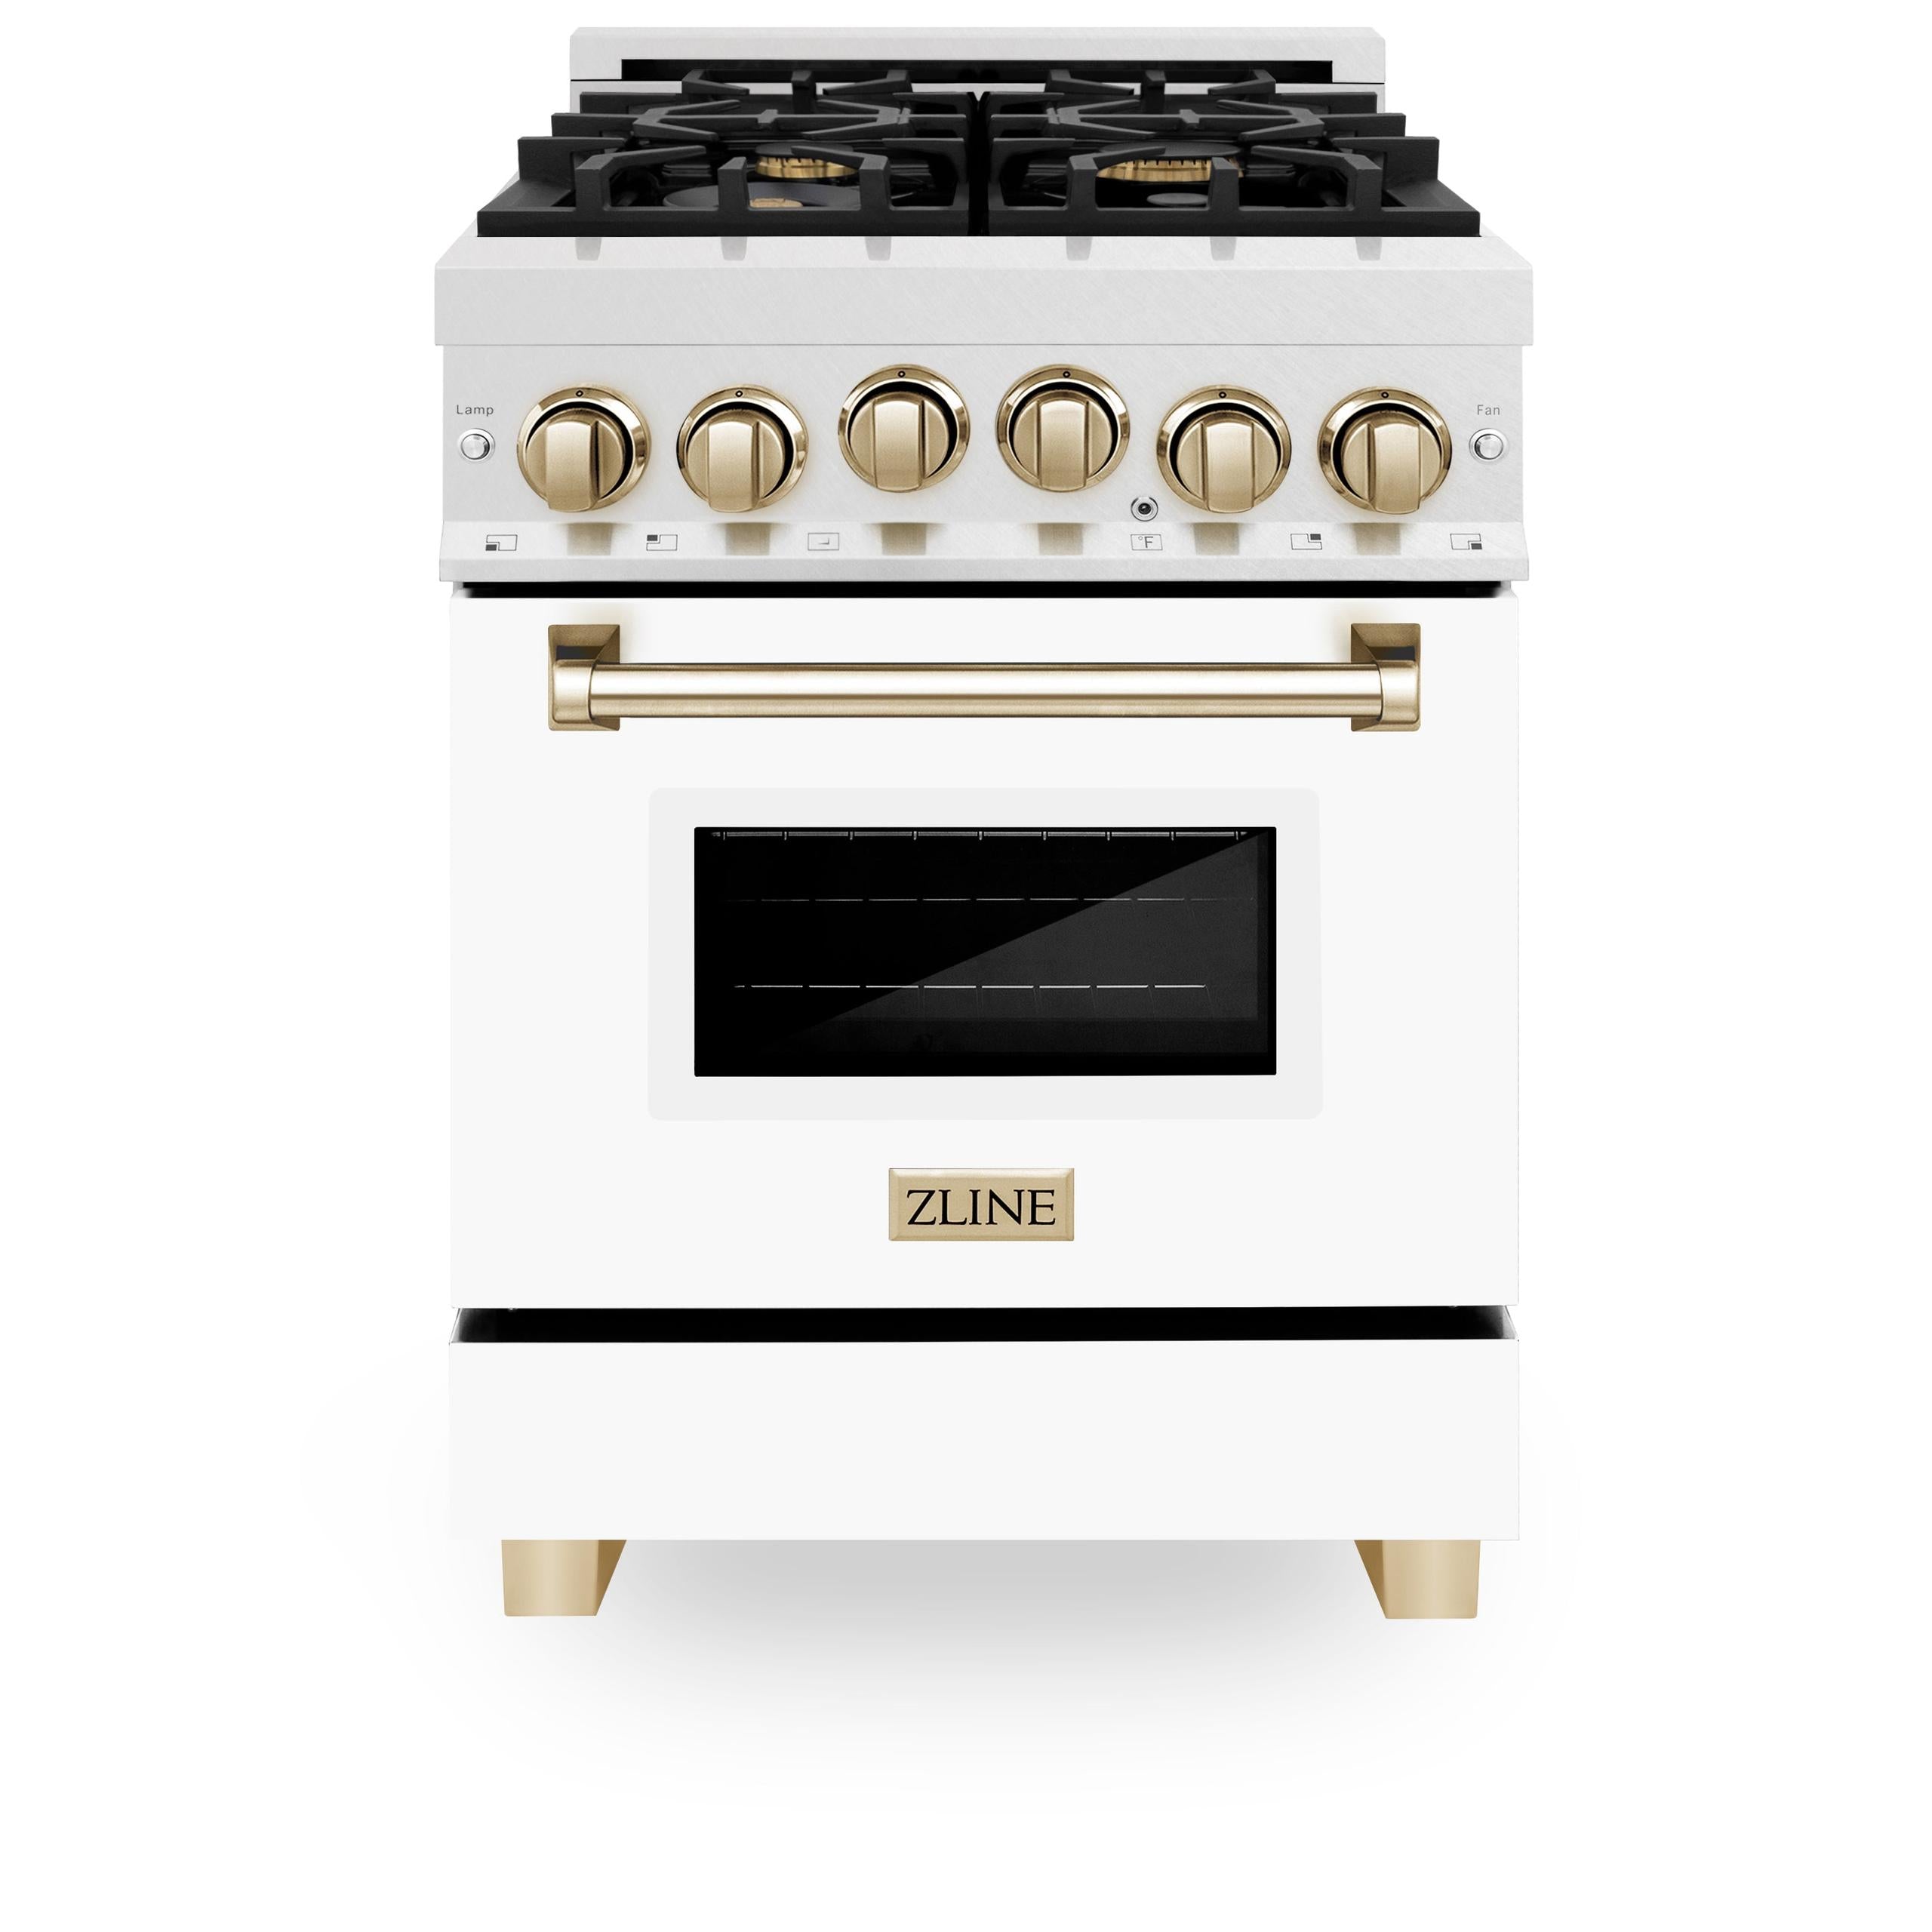 ZLINE KITCHEN AND BATH RGSZWM24MB ZLINE Autograph Edition 24" 2.8 cu. ft. Range with Gas Stove and Gas Oven in DuraSnow R Stainless Steel with White Matte Door and Accents Color: Matte Black